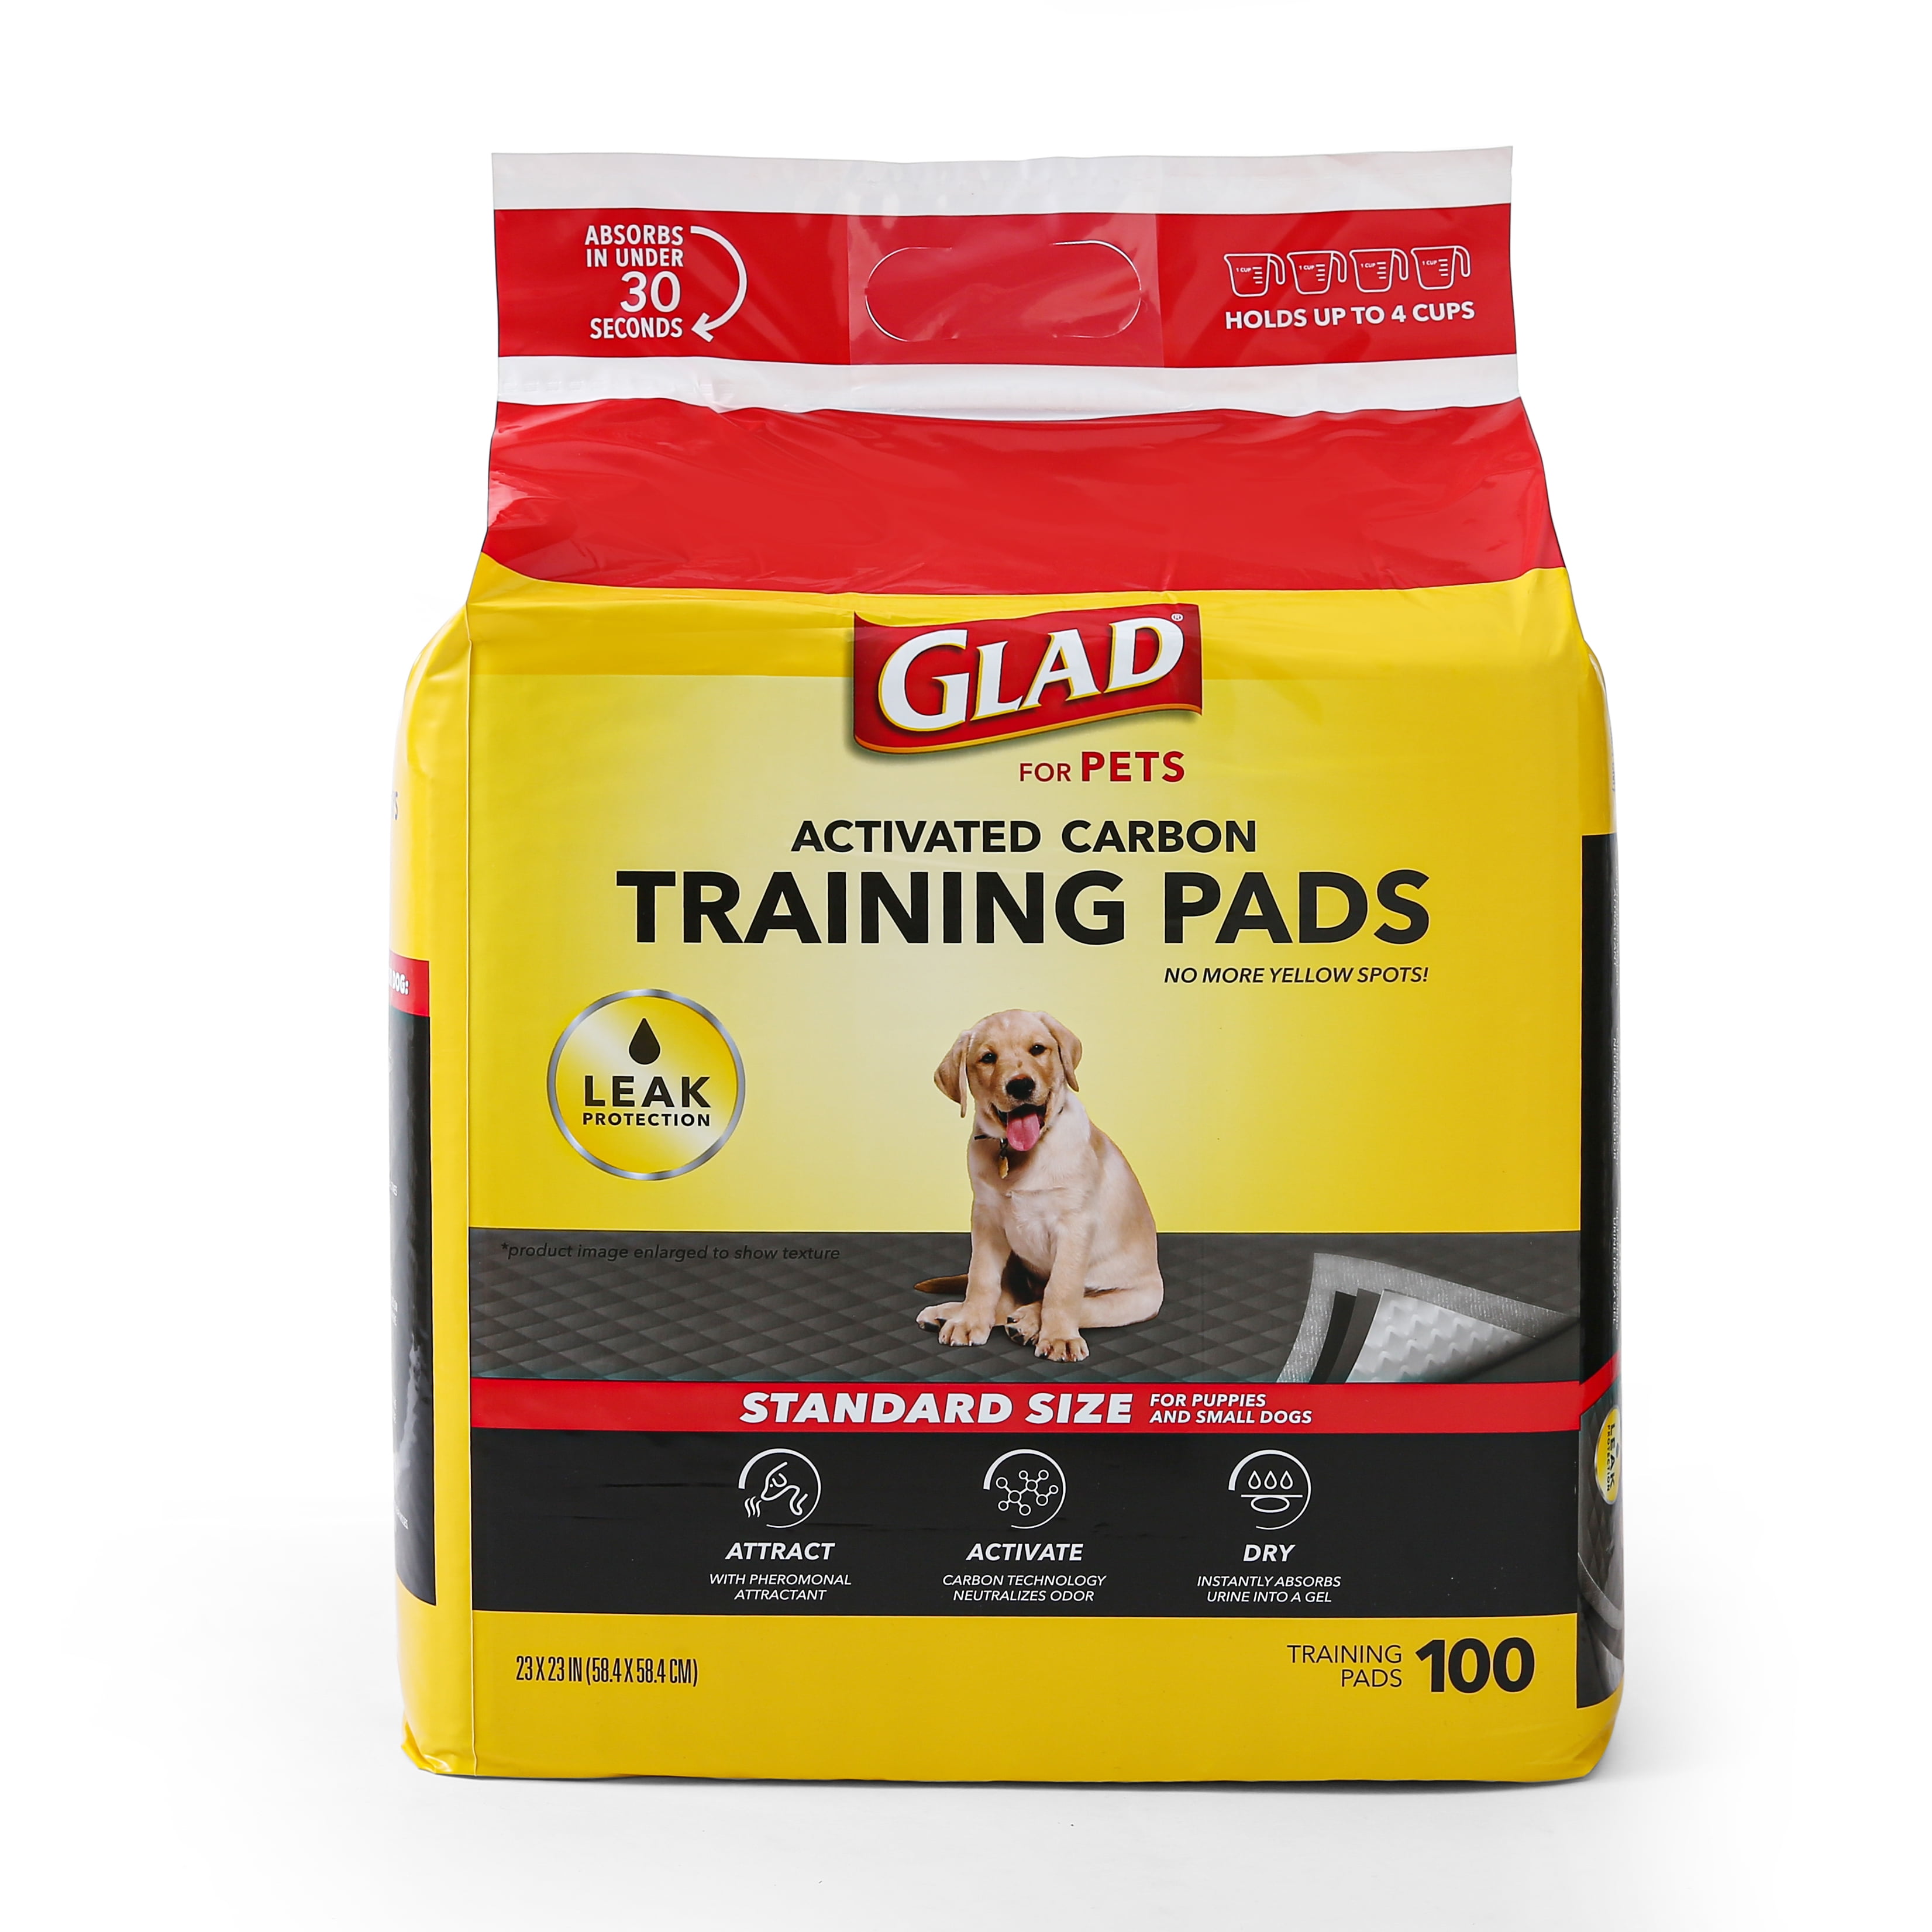 Glad Activated Charcoal Training Pads for Dogs, 100 Count